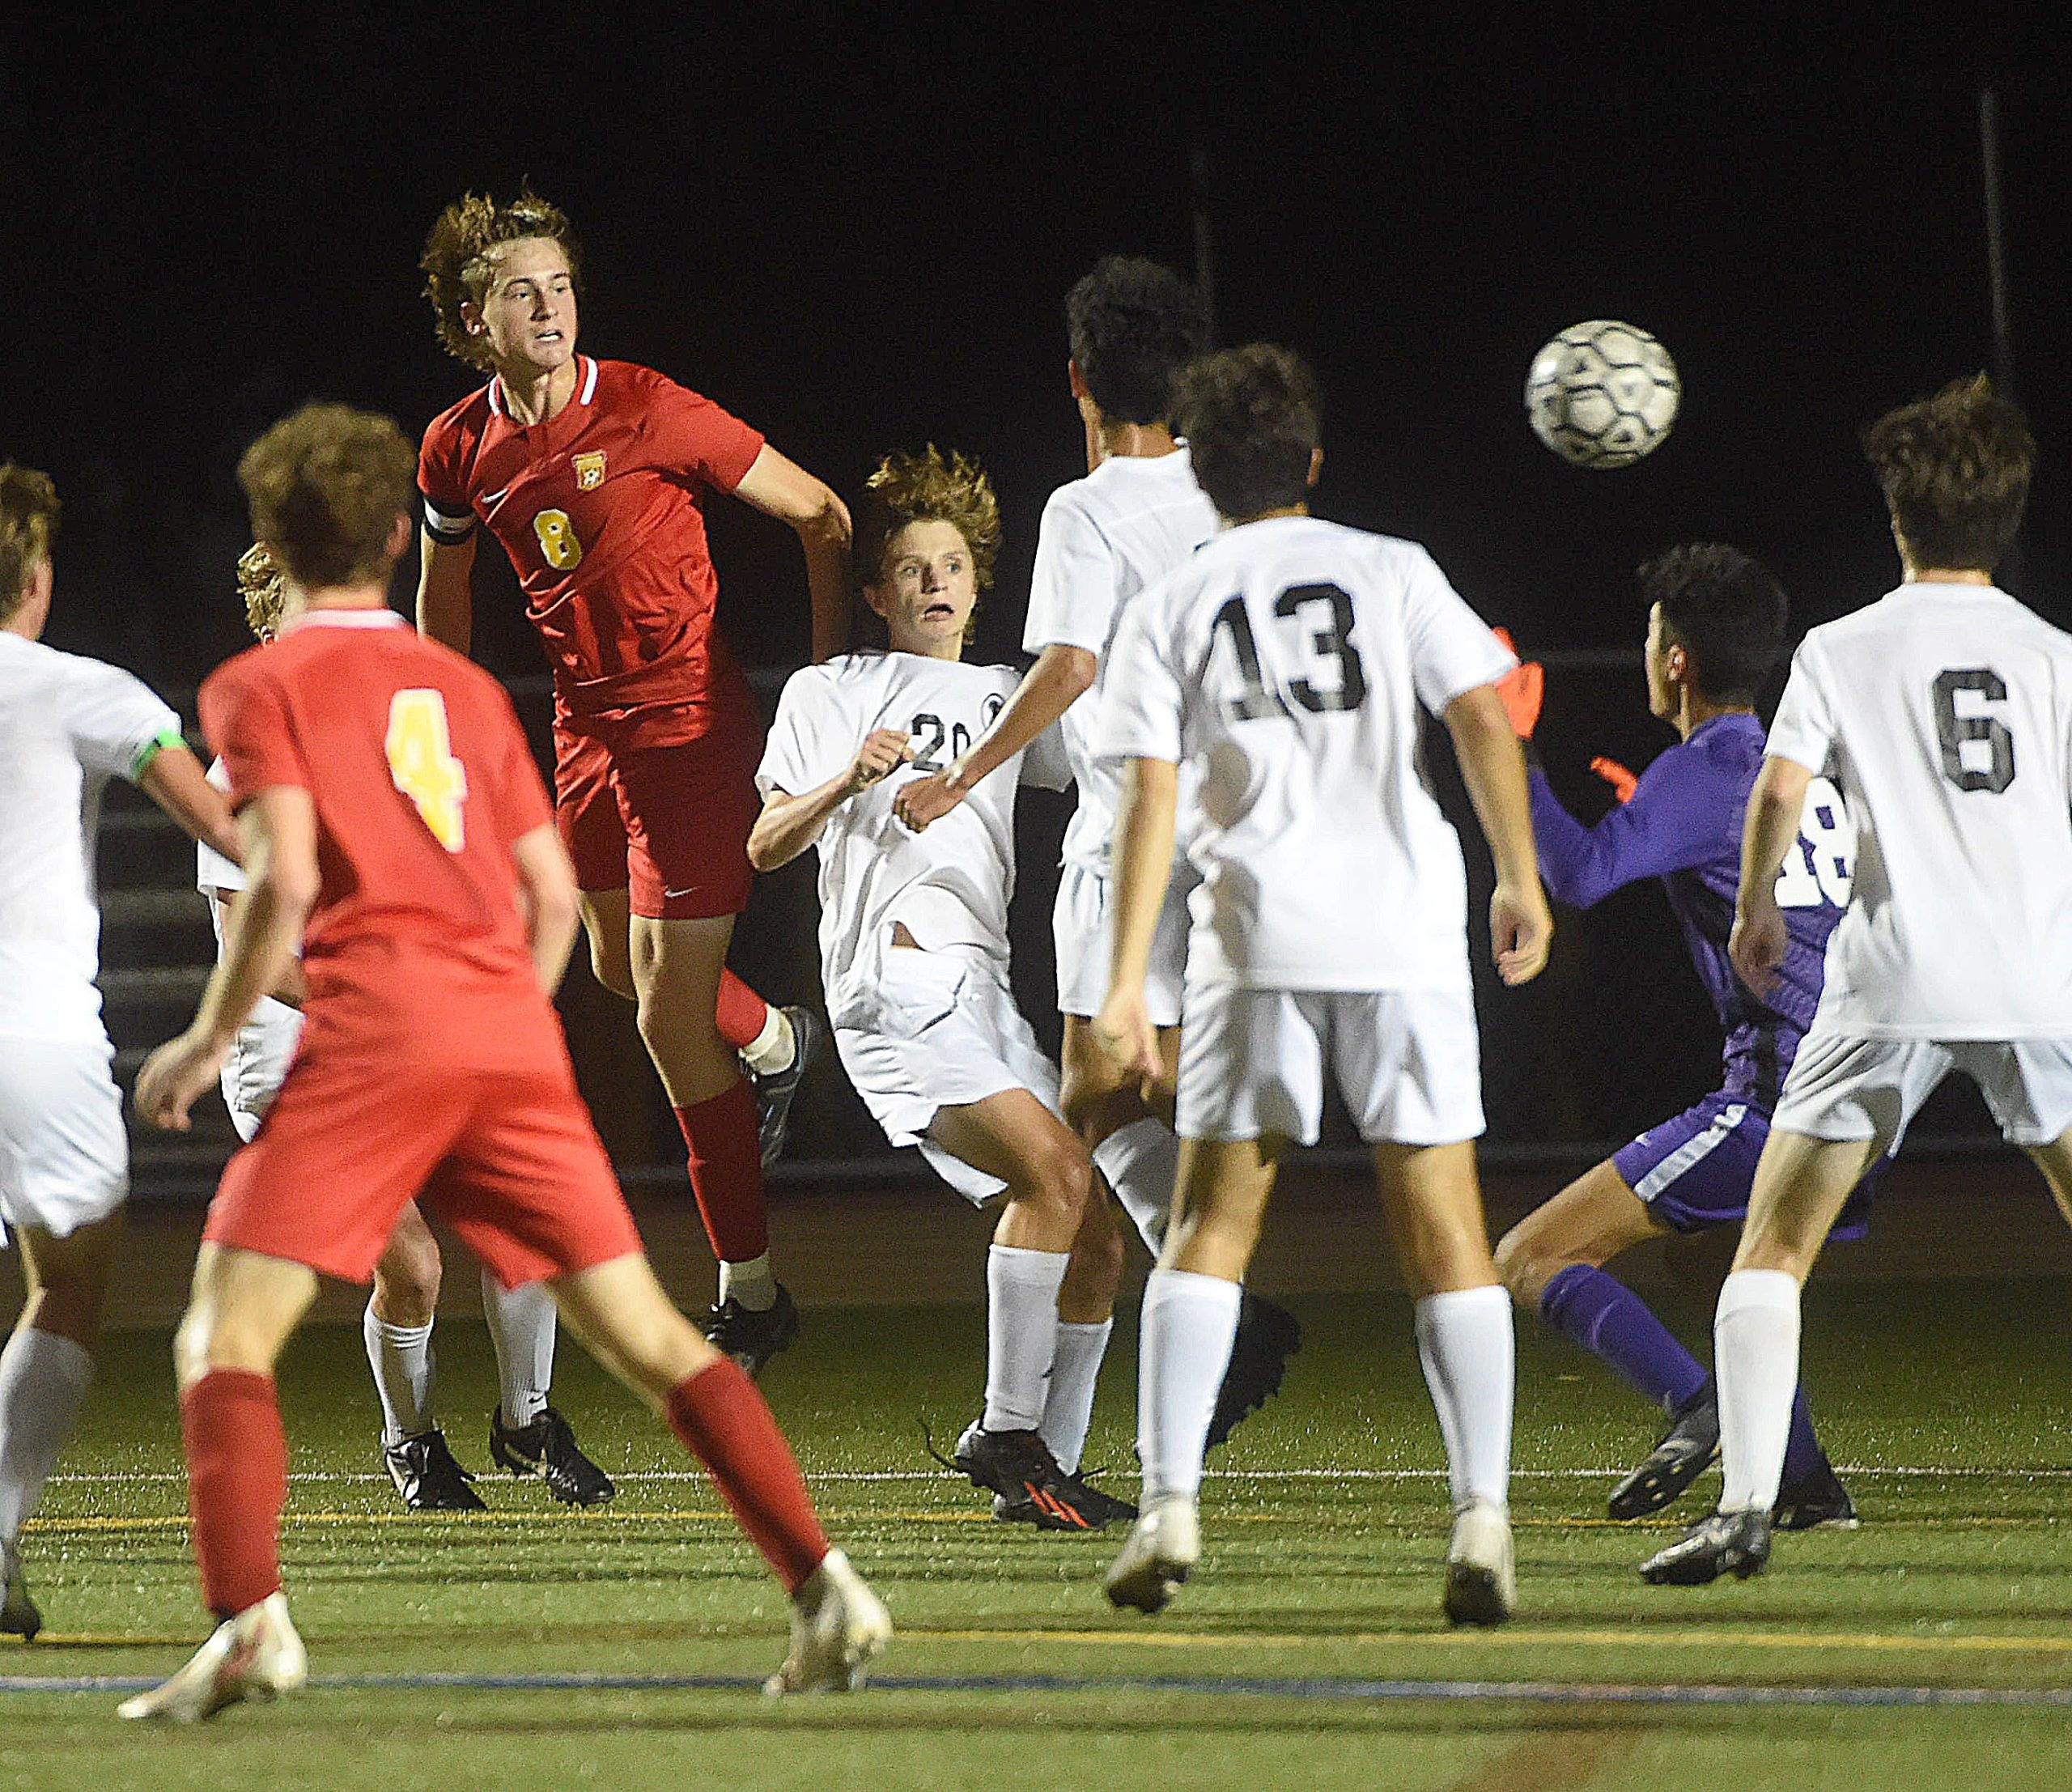 Boys Soccer All-Delco Cresswell, Kaplan backstopped Haverford School